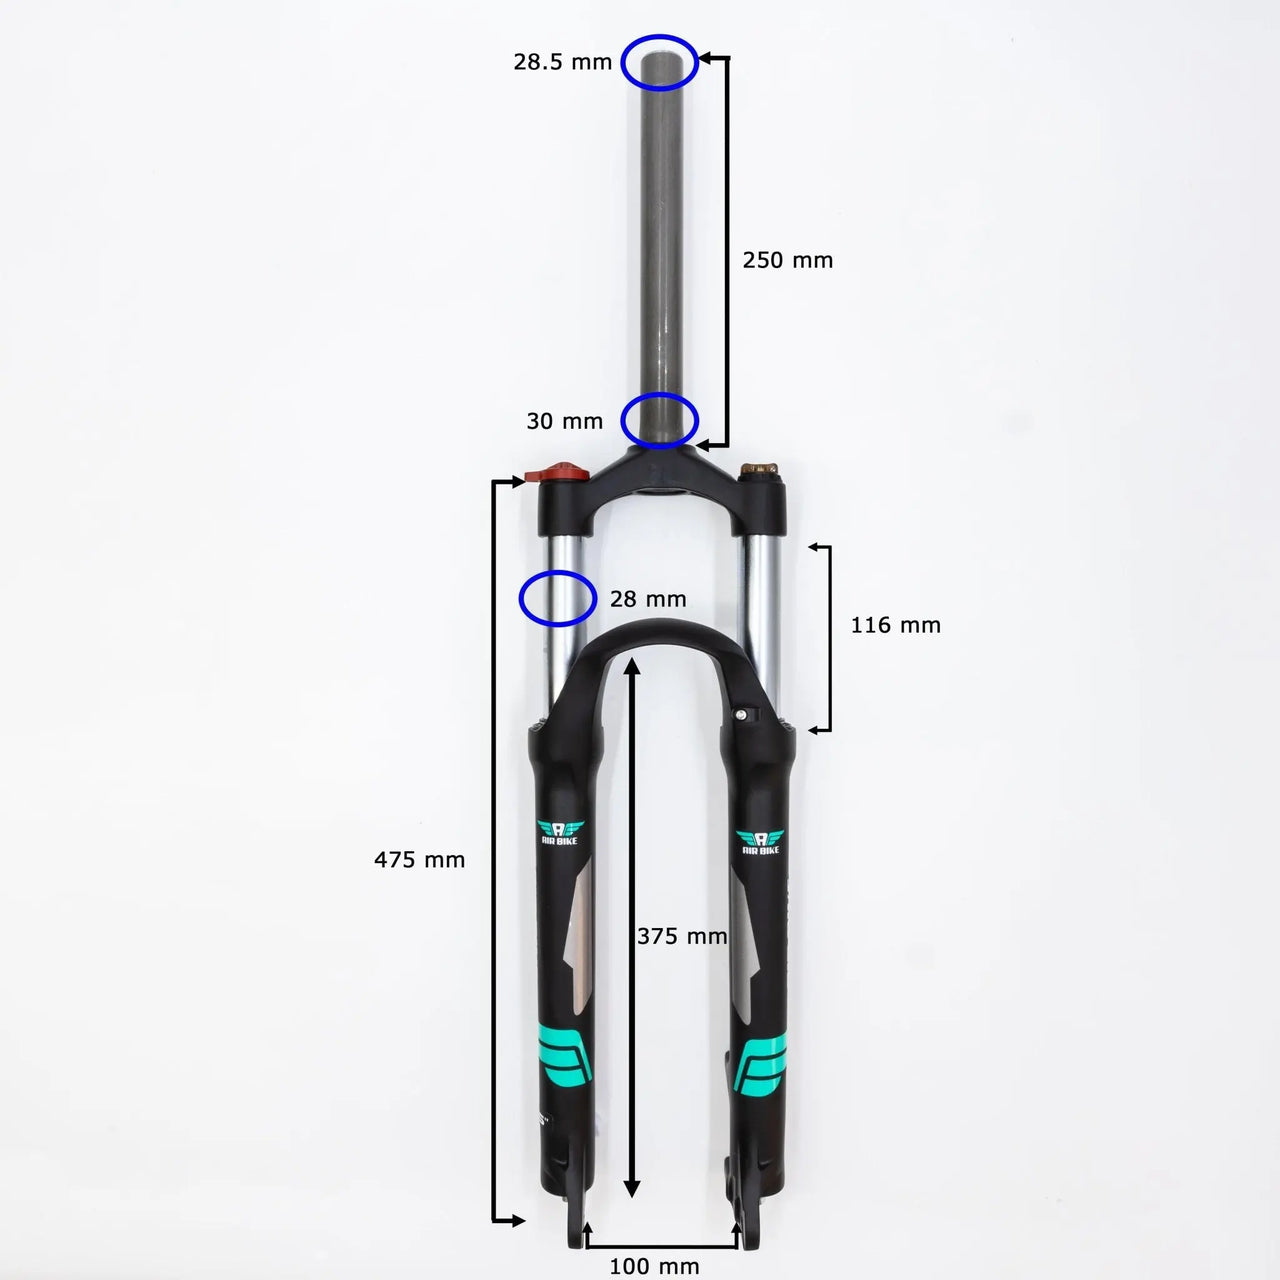 Detailed view of the 27.5-inch mountain bike suspension fork with measurement indicators